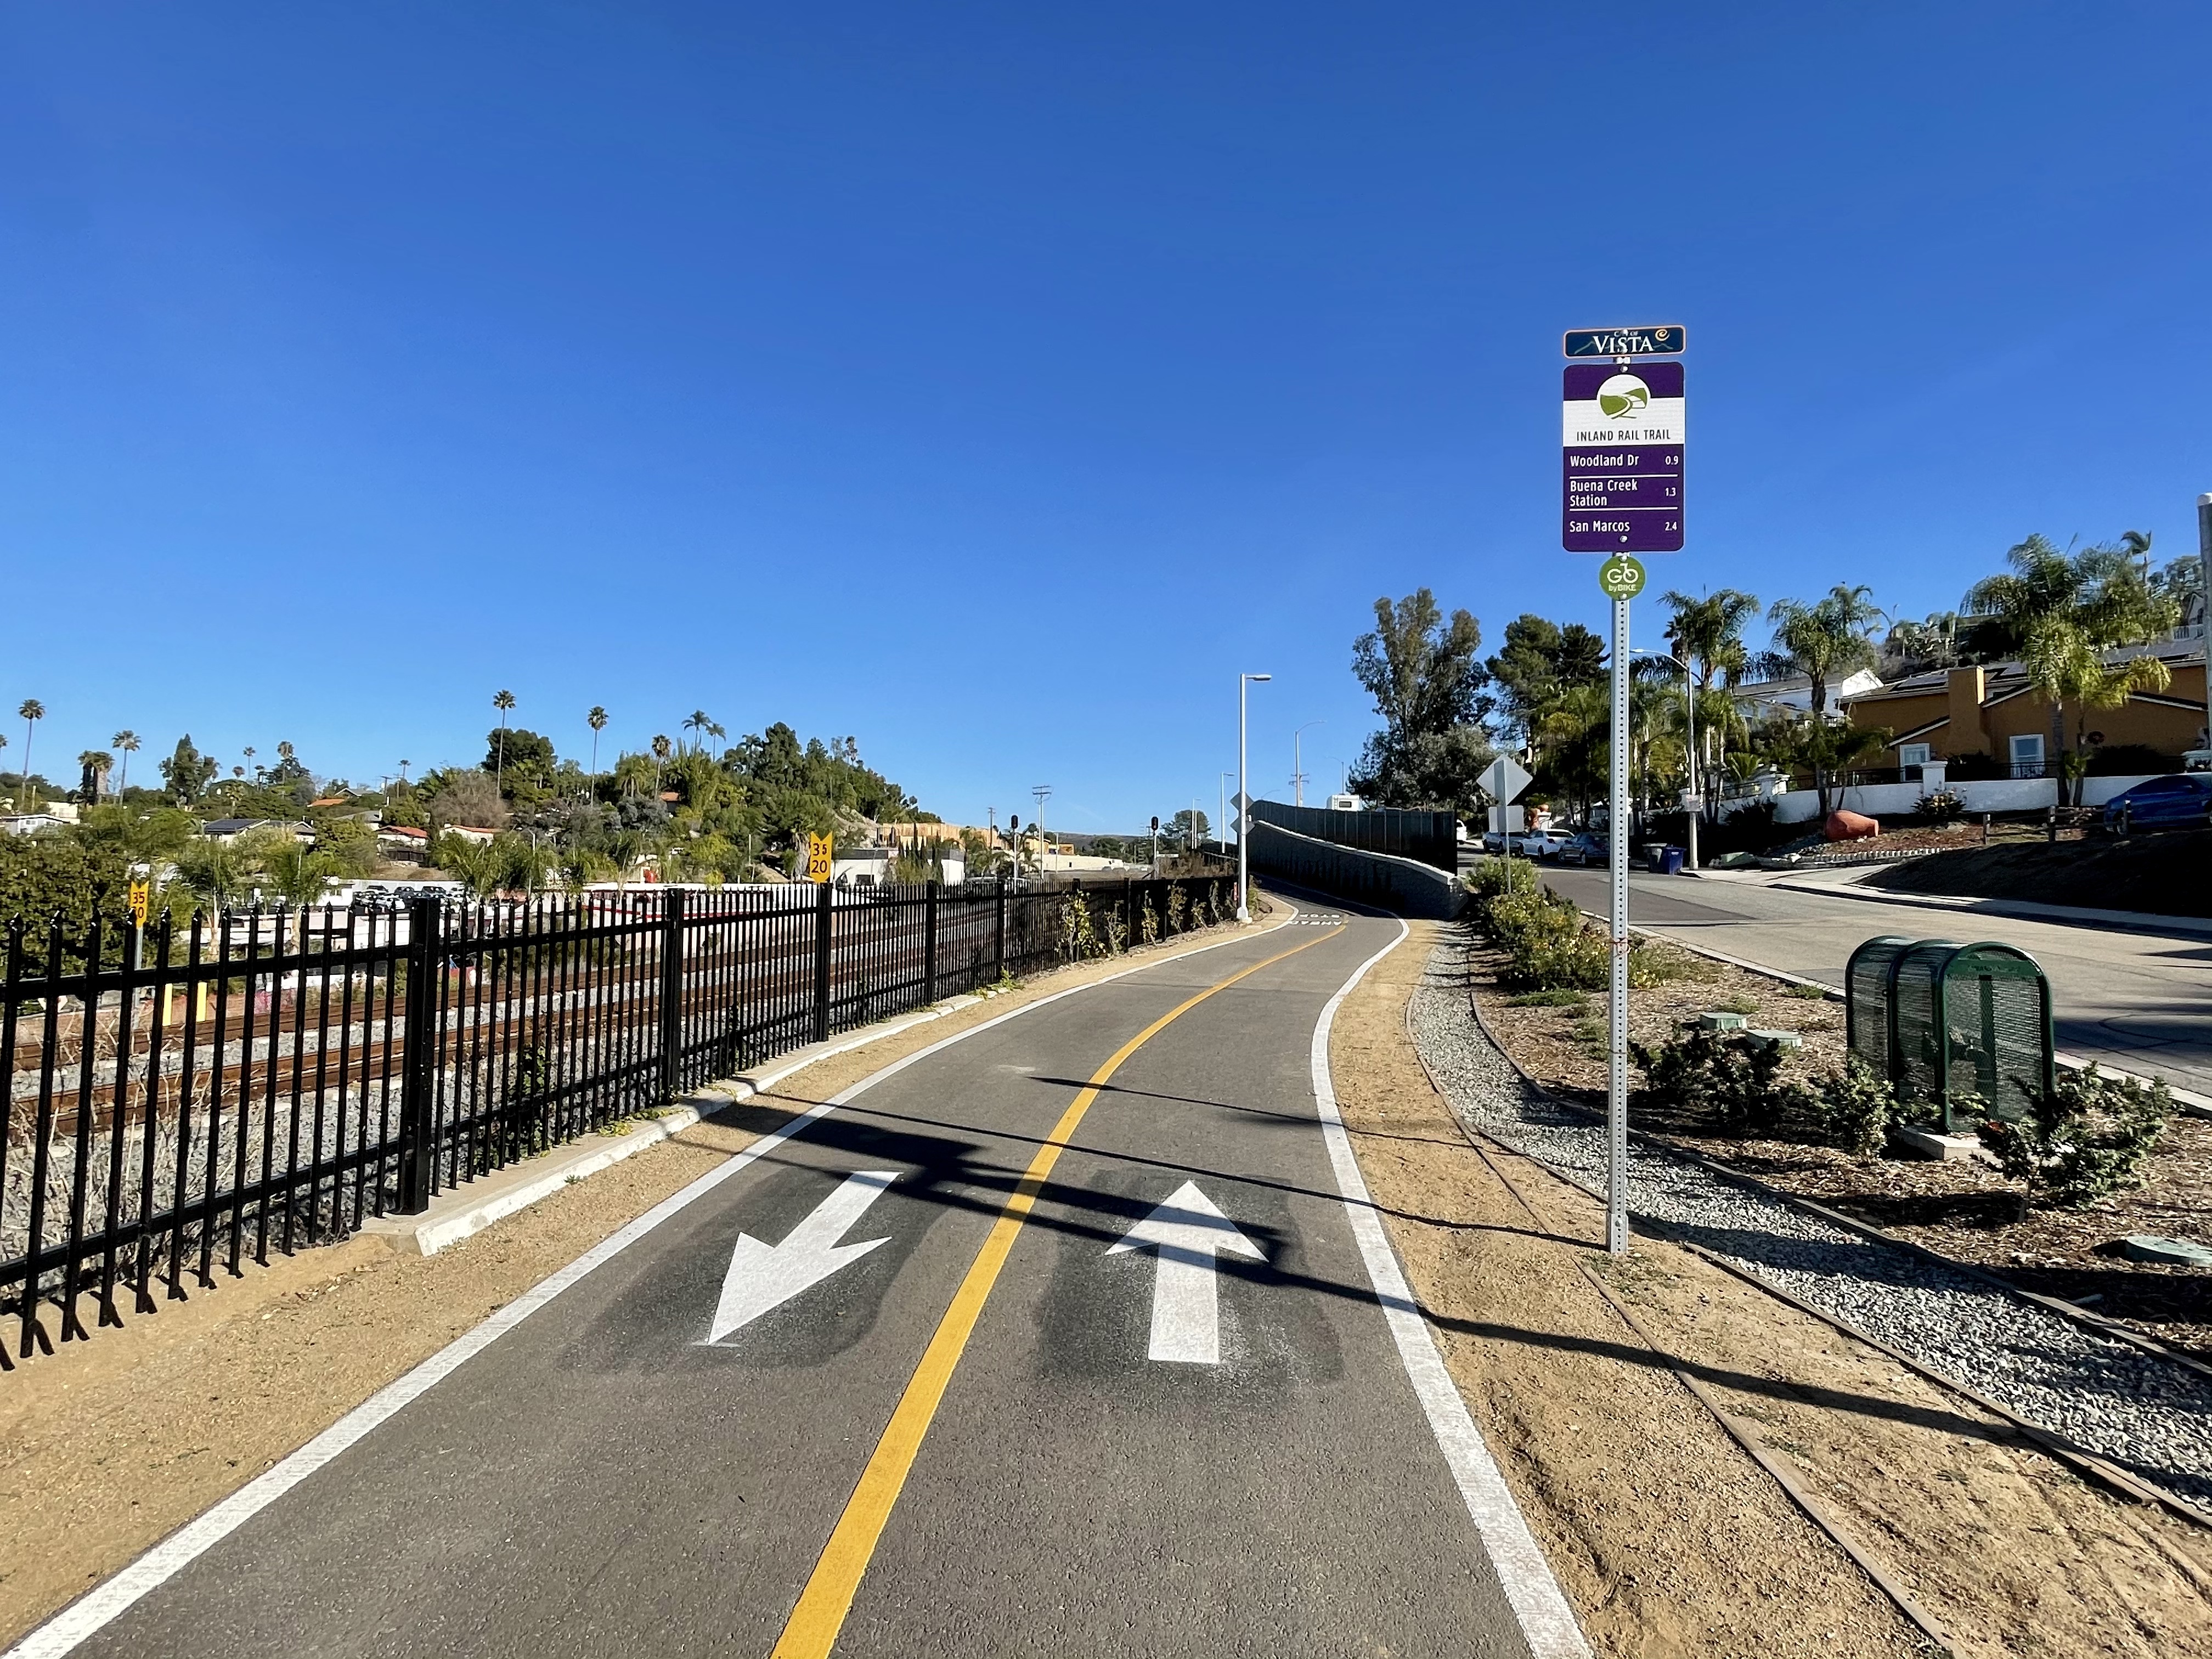 Completed Bikeway with striping and signage